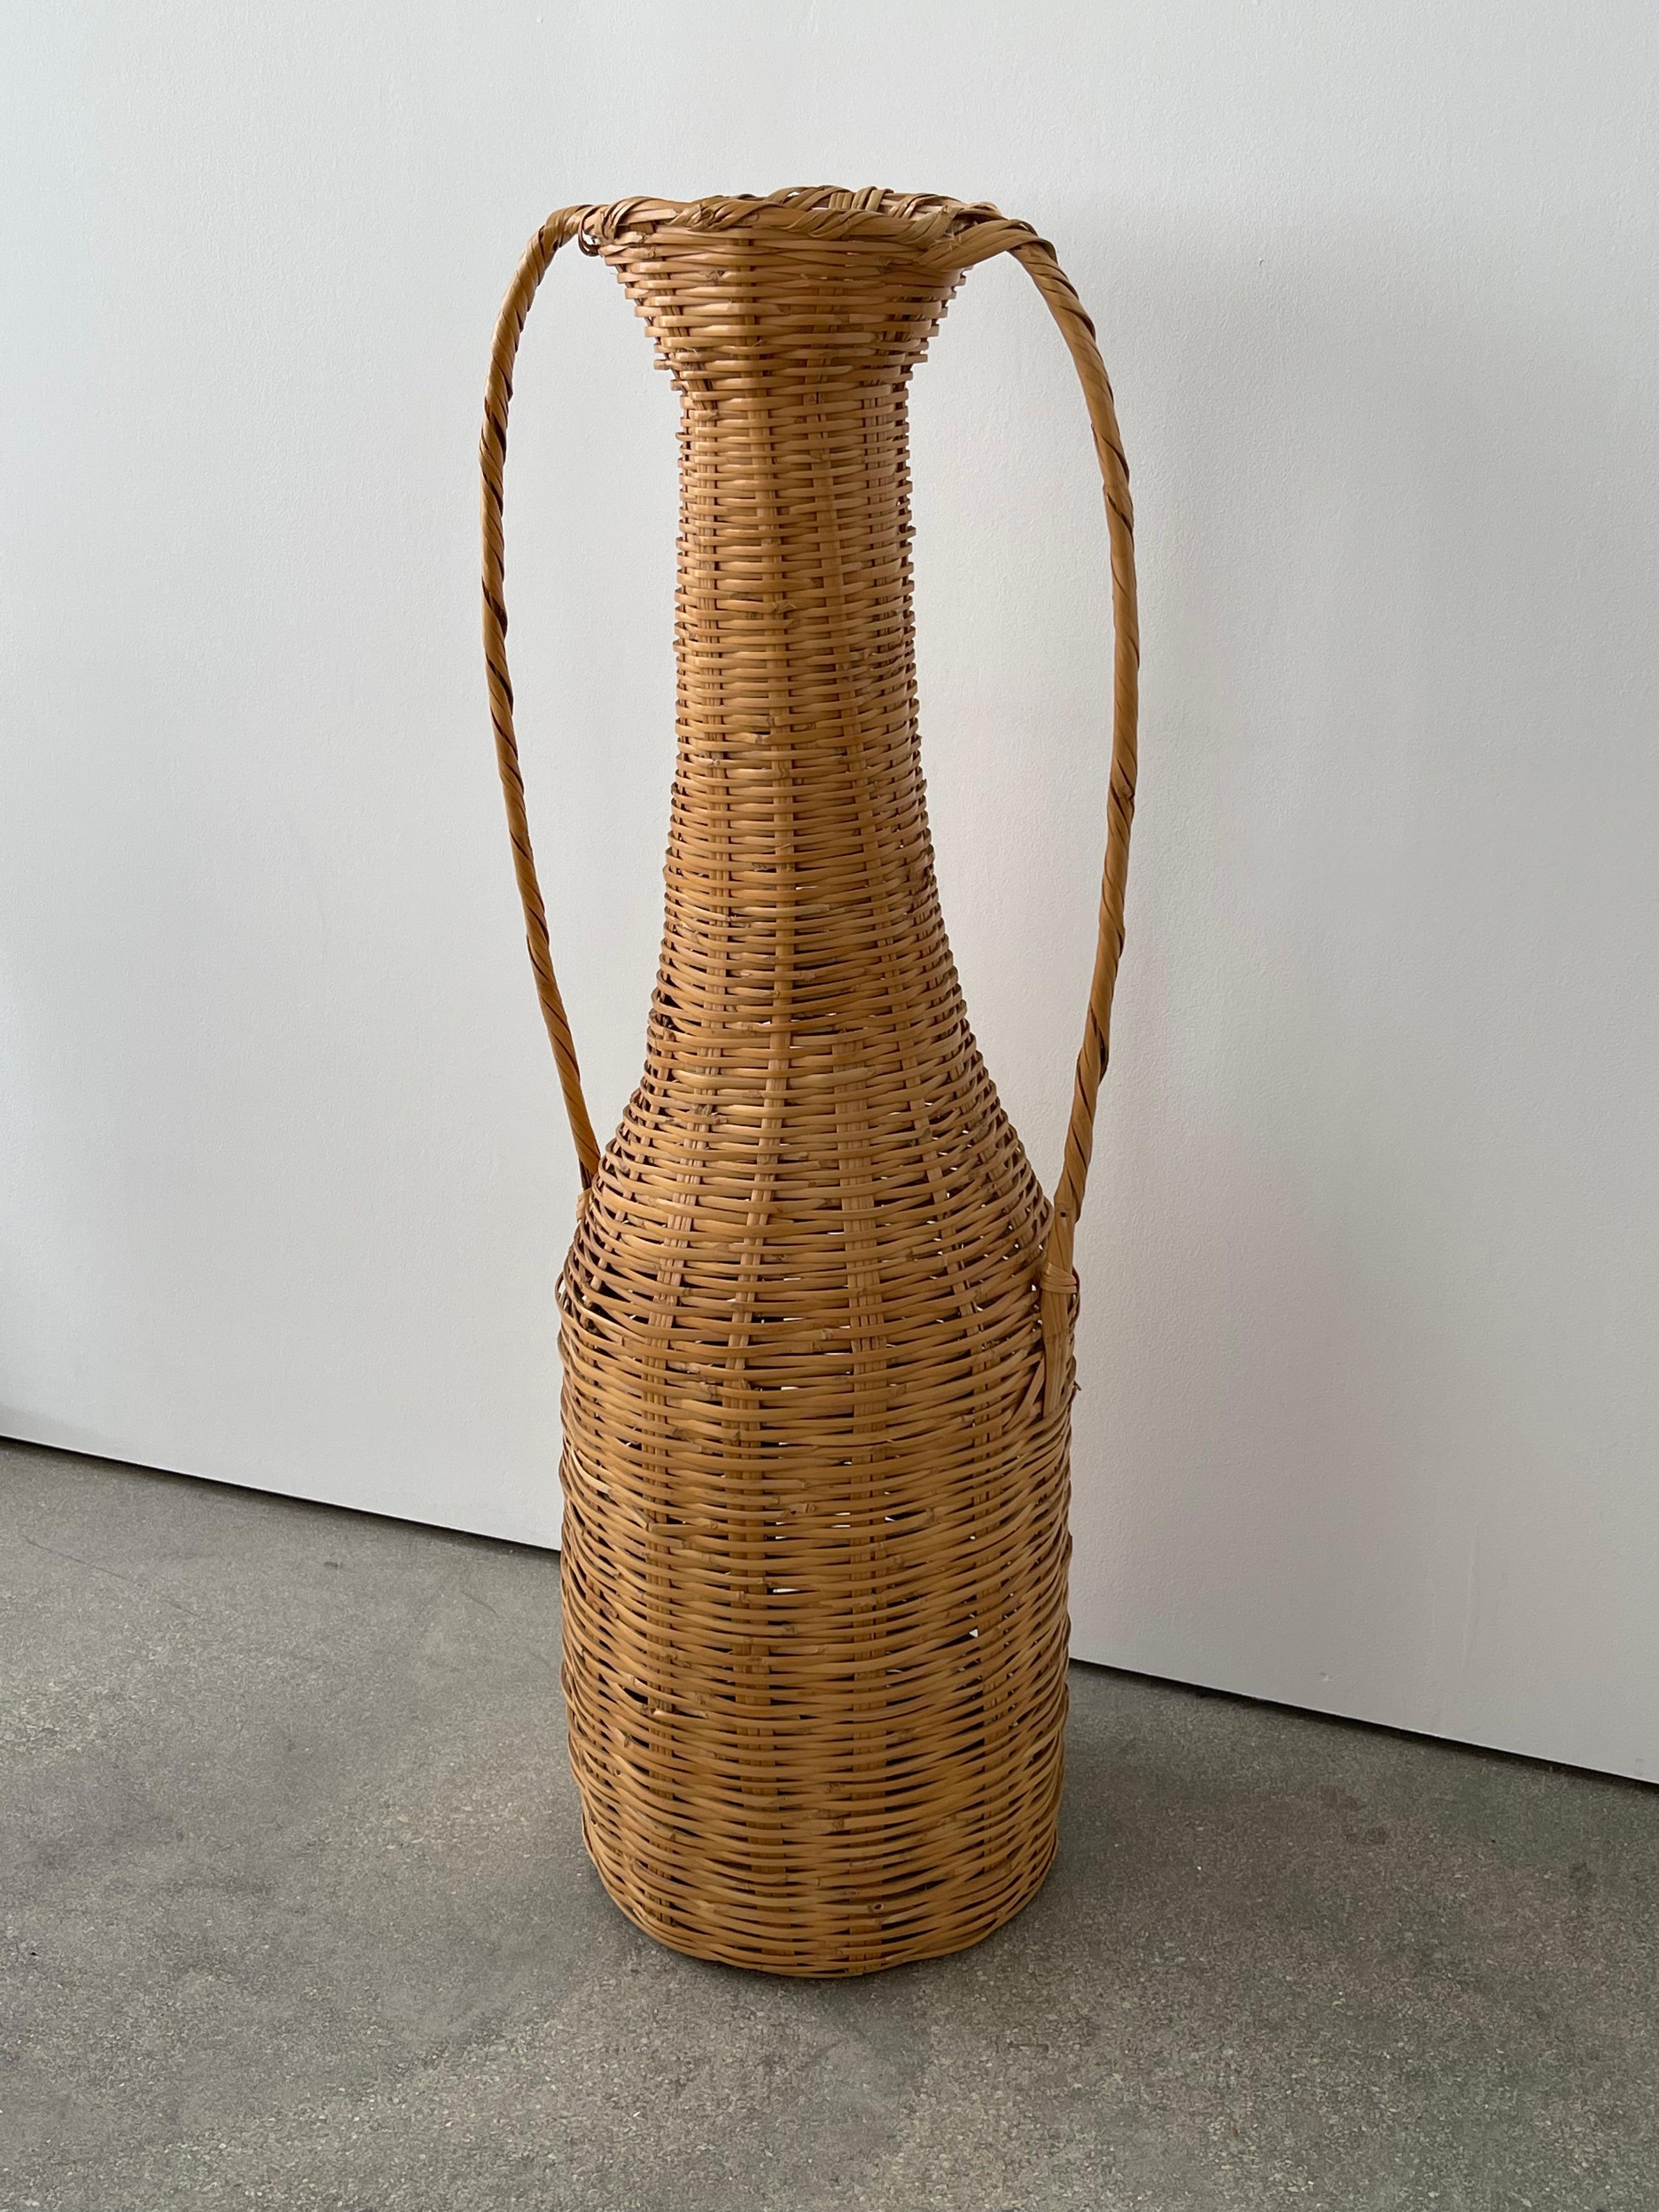 American Craftsman 20th Century Woven Reed XL Vessel For Sale